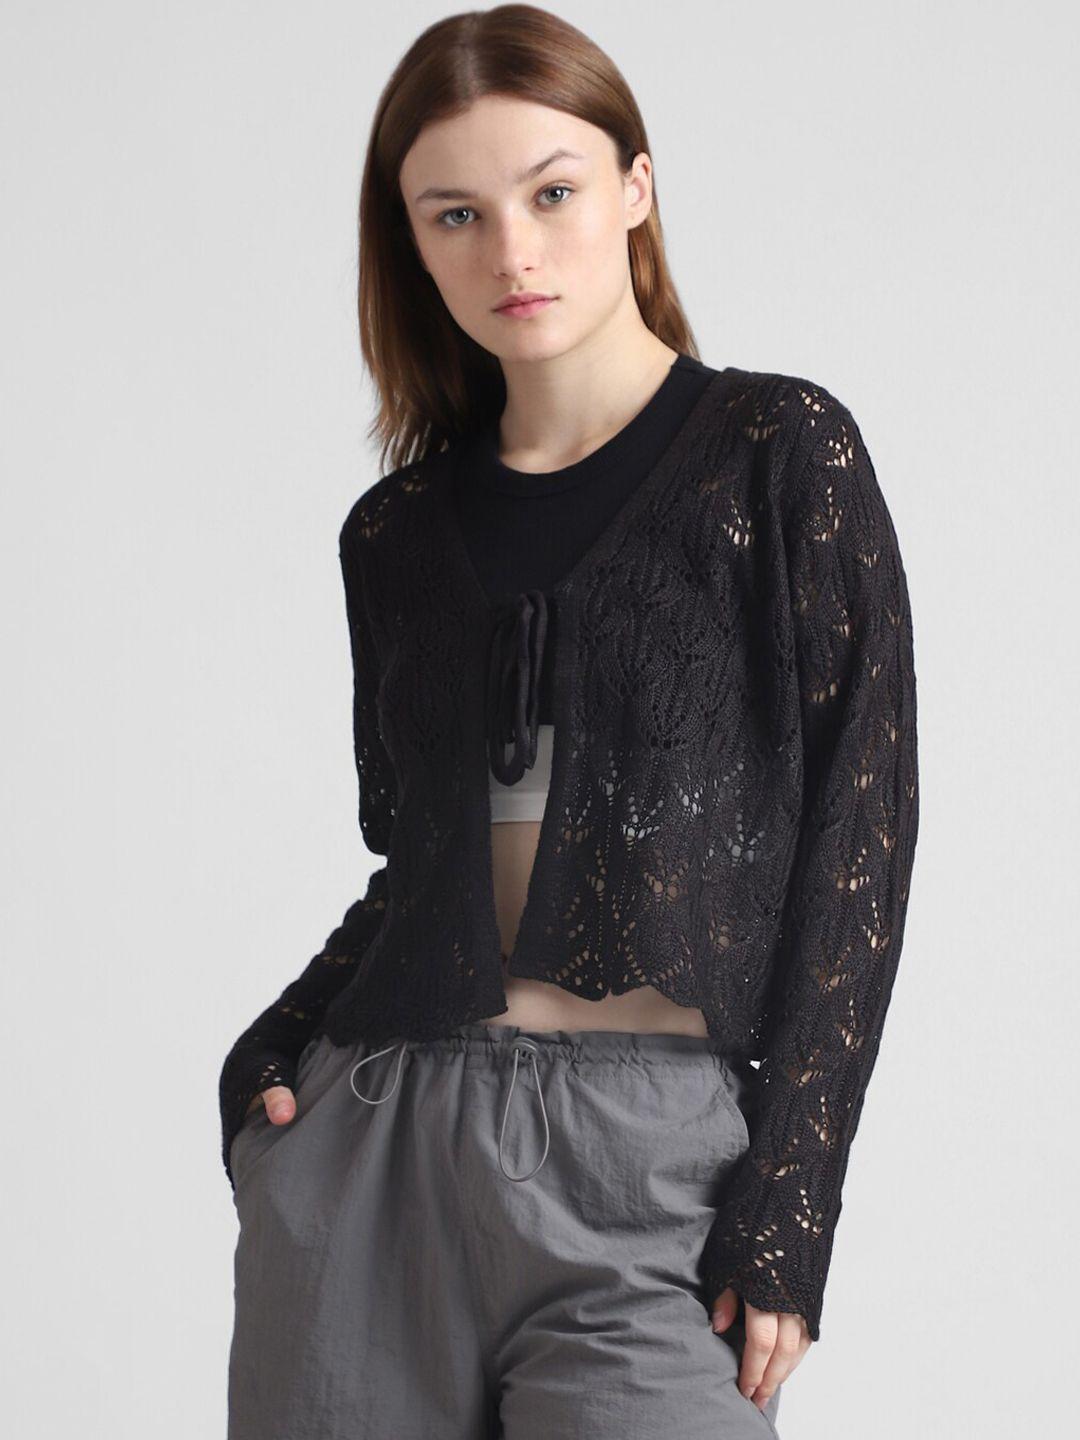 only-self-design-lace-detail-knitted-semi-sheer-acrylic-shrugs